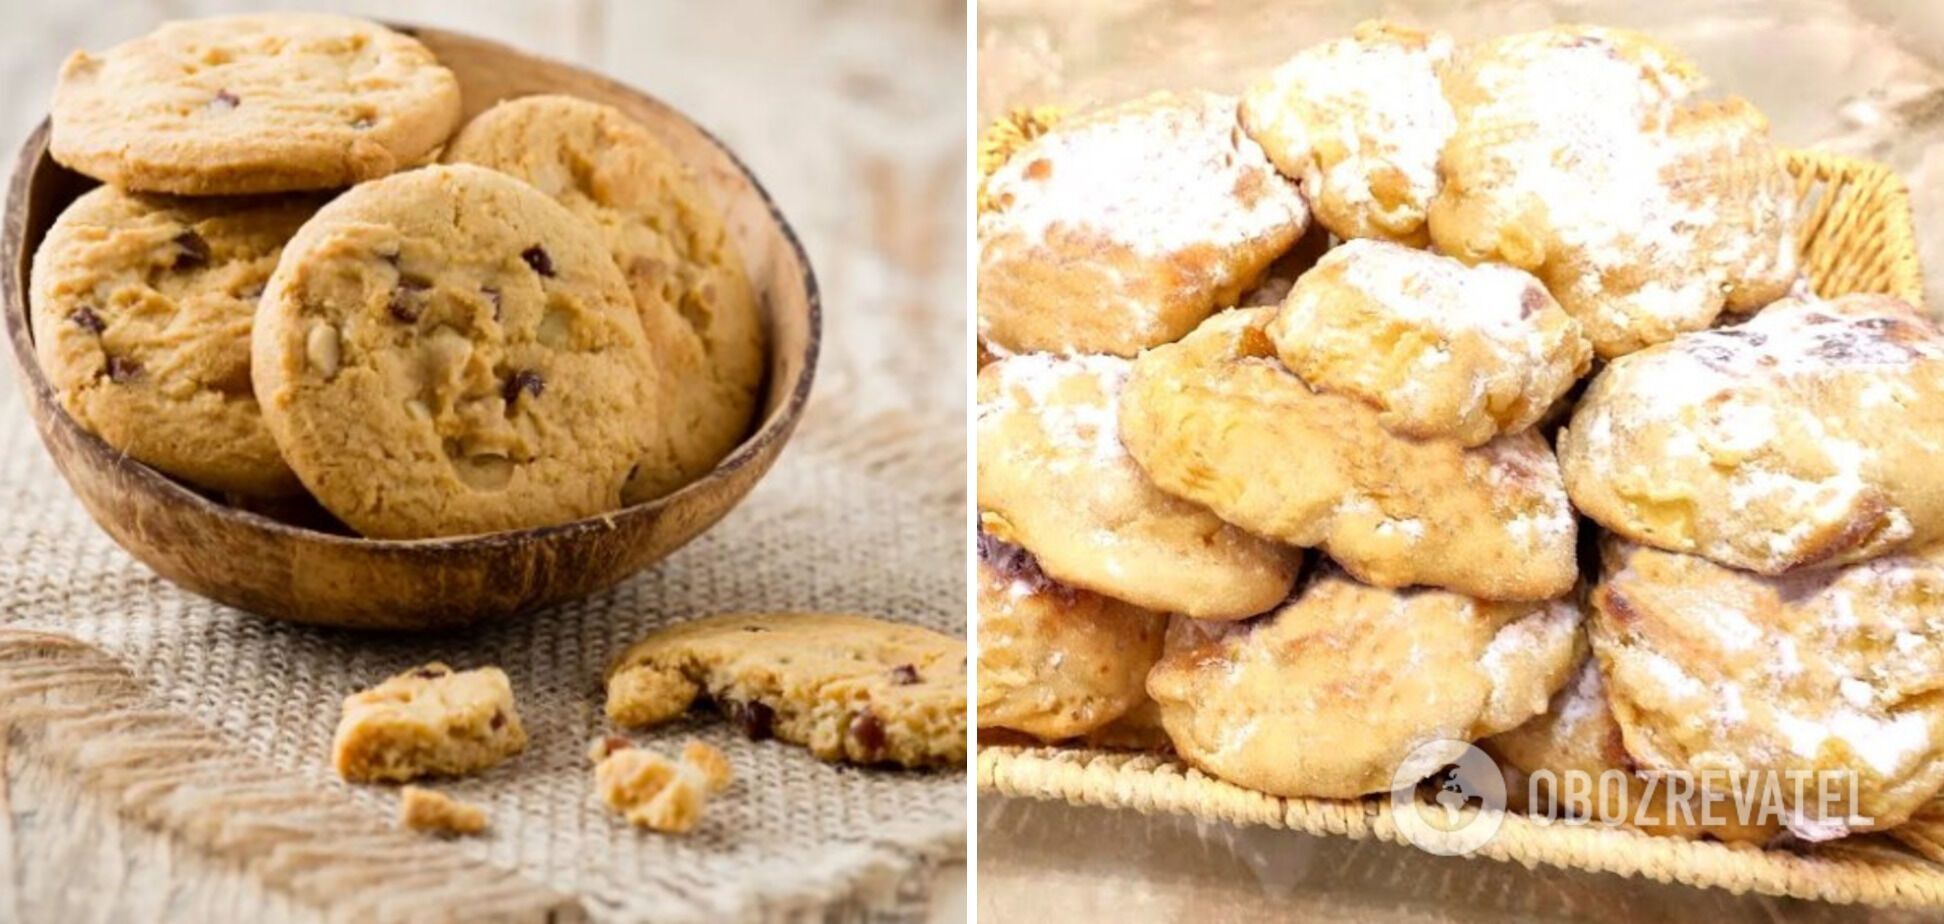 Homemade cookies in 20 minutes